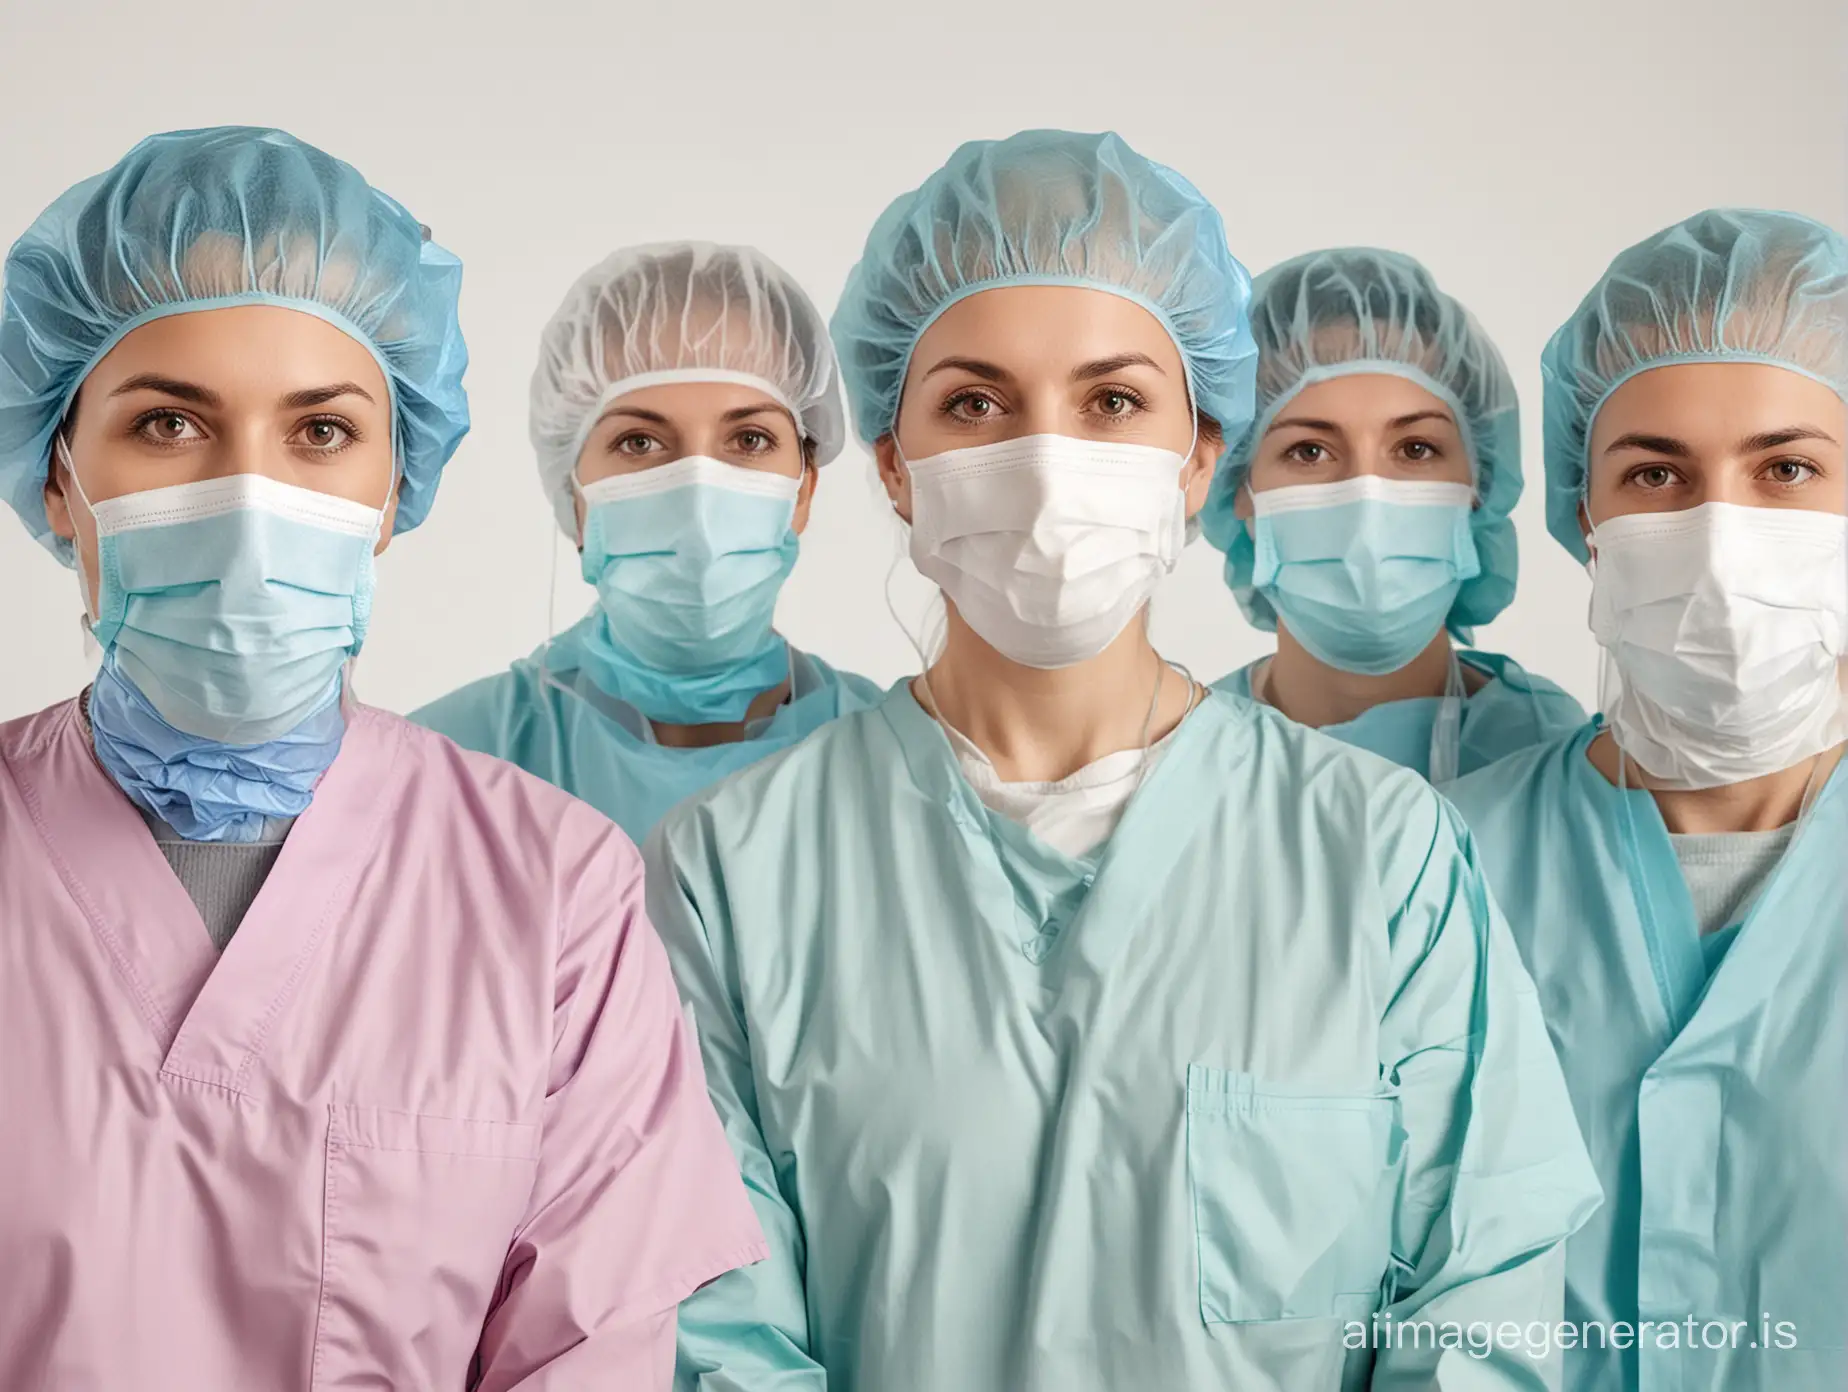 a group of three anesthesiologist facing a group of a hundred of common people, diverse ages. White cbackground